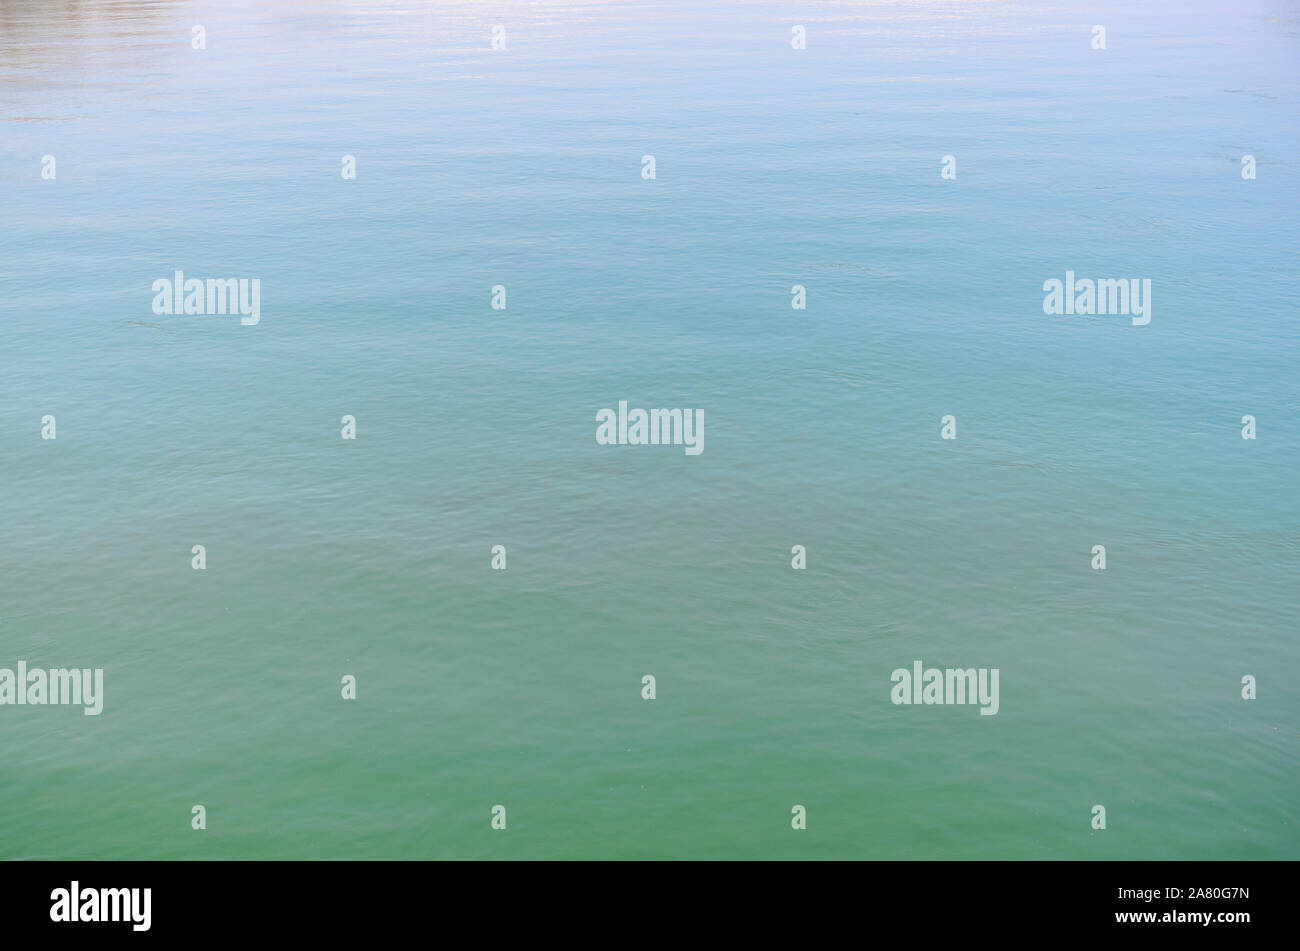 Background texture of tranquil rippling blue-green water in a full frame view Stock Photo